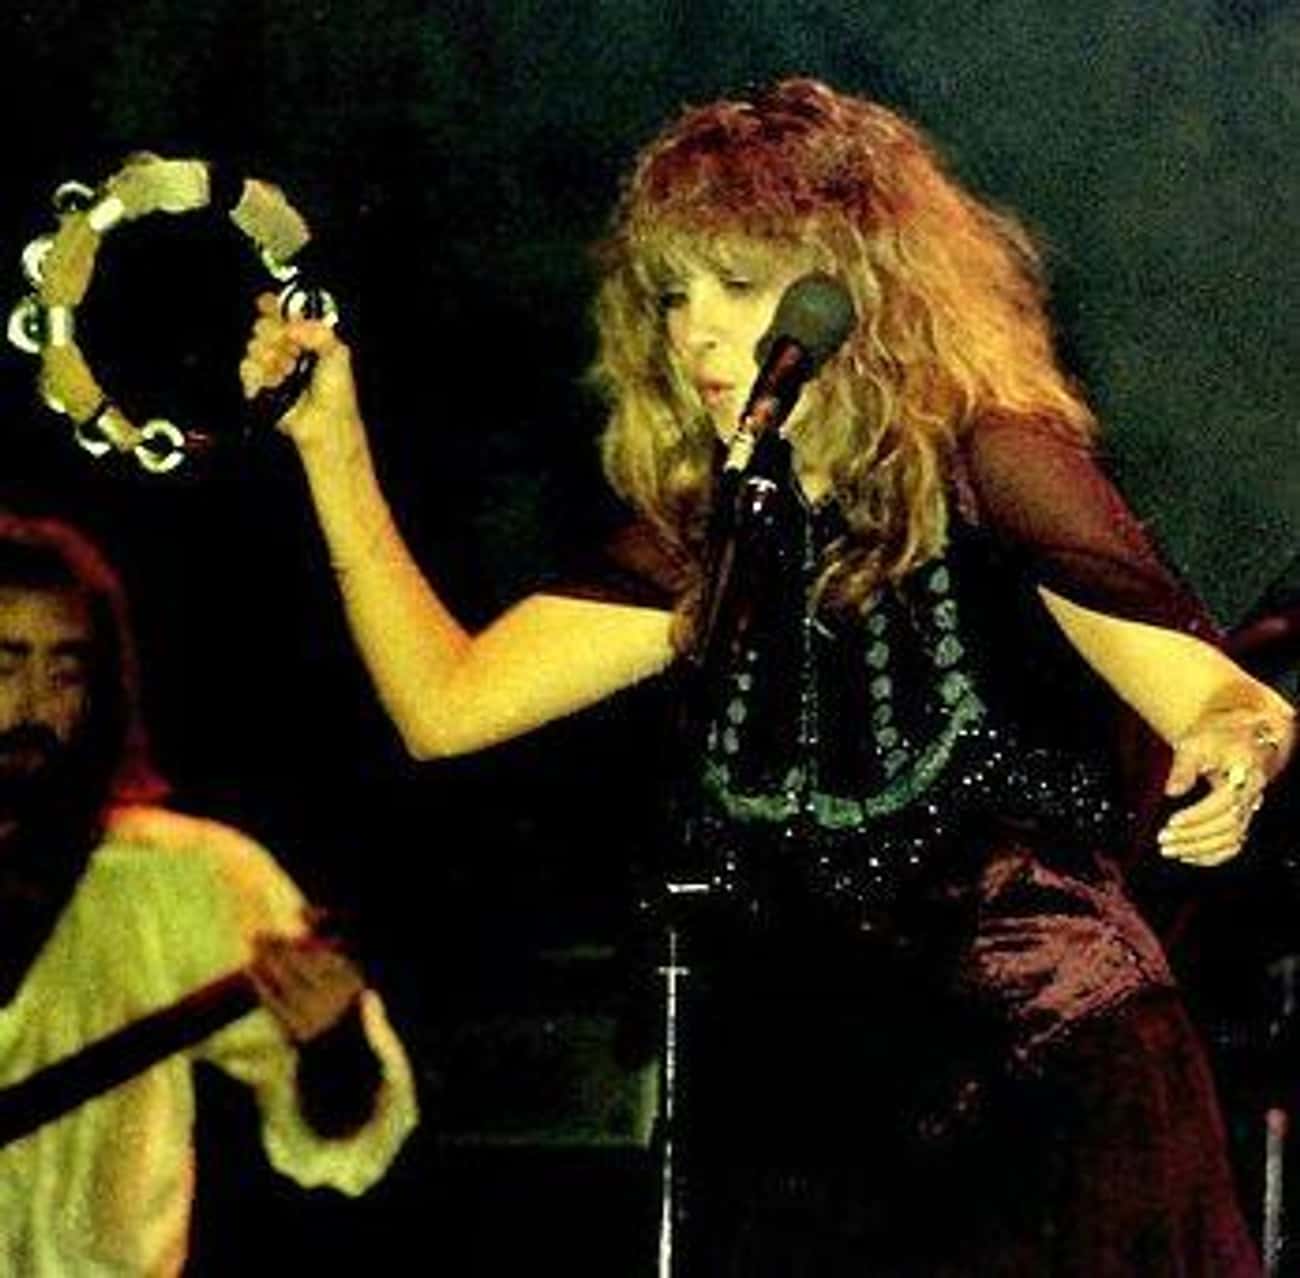 During The Recording Of “Fleetwood Mac” Stevie Rarely Stopped Dancing